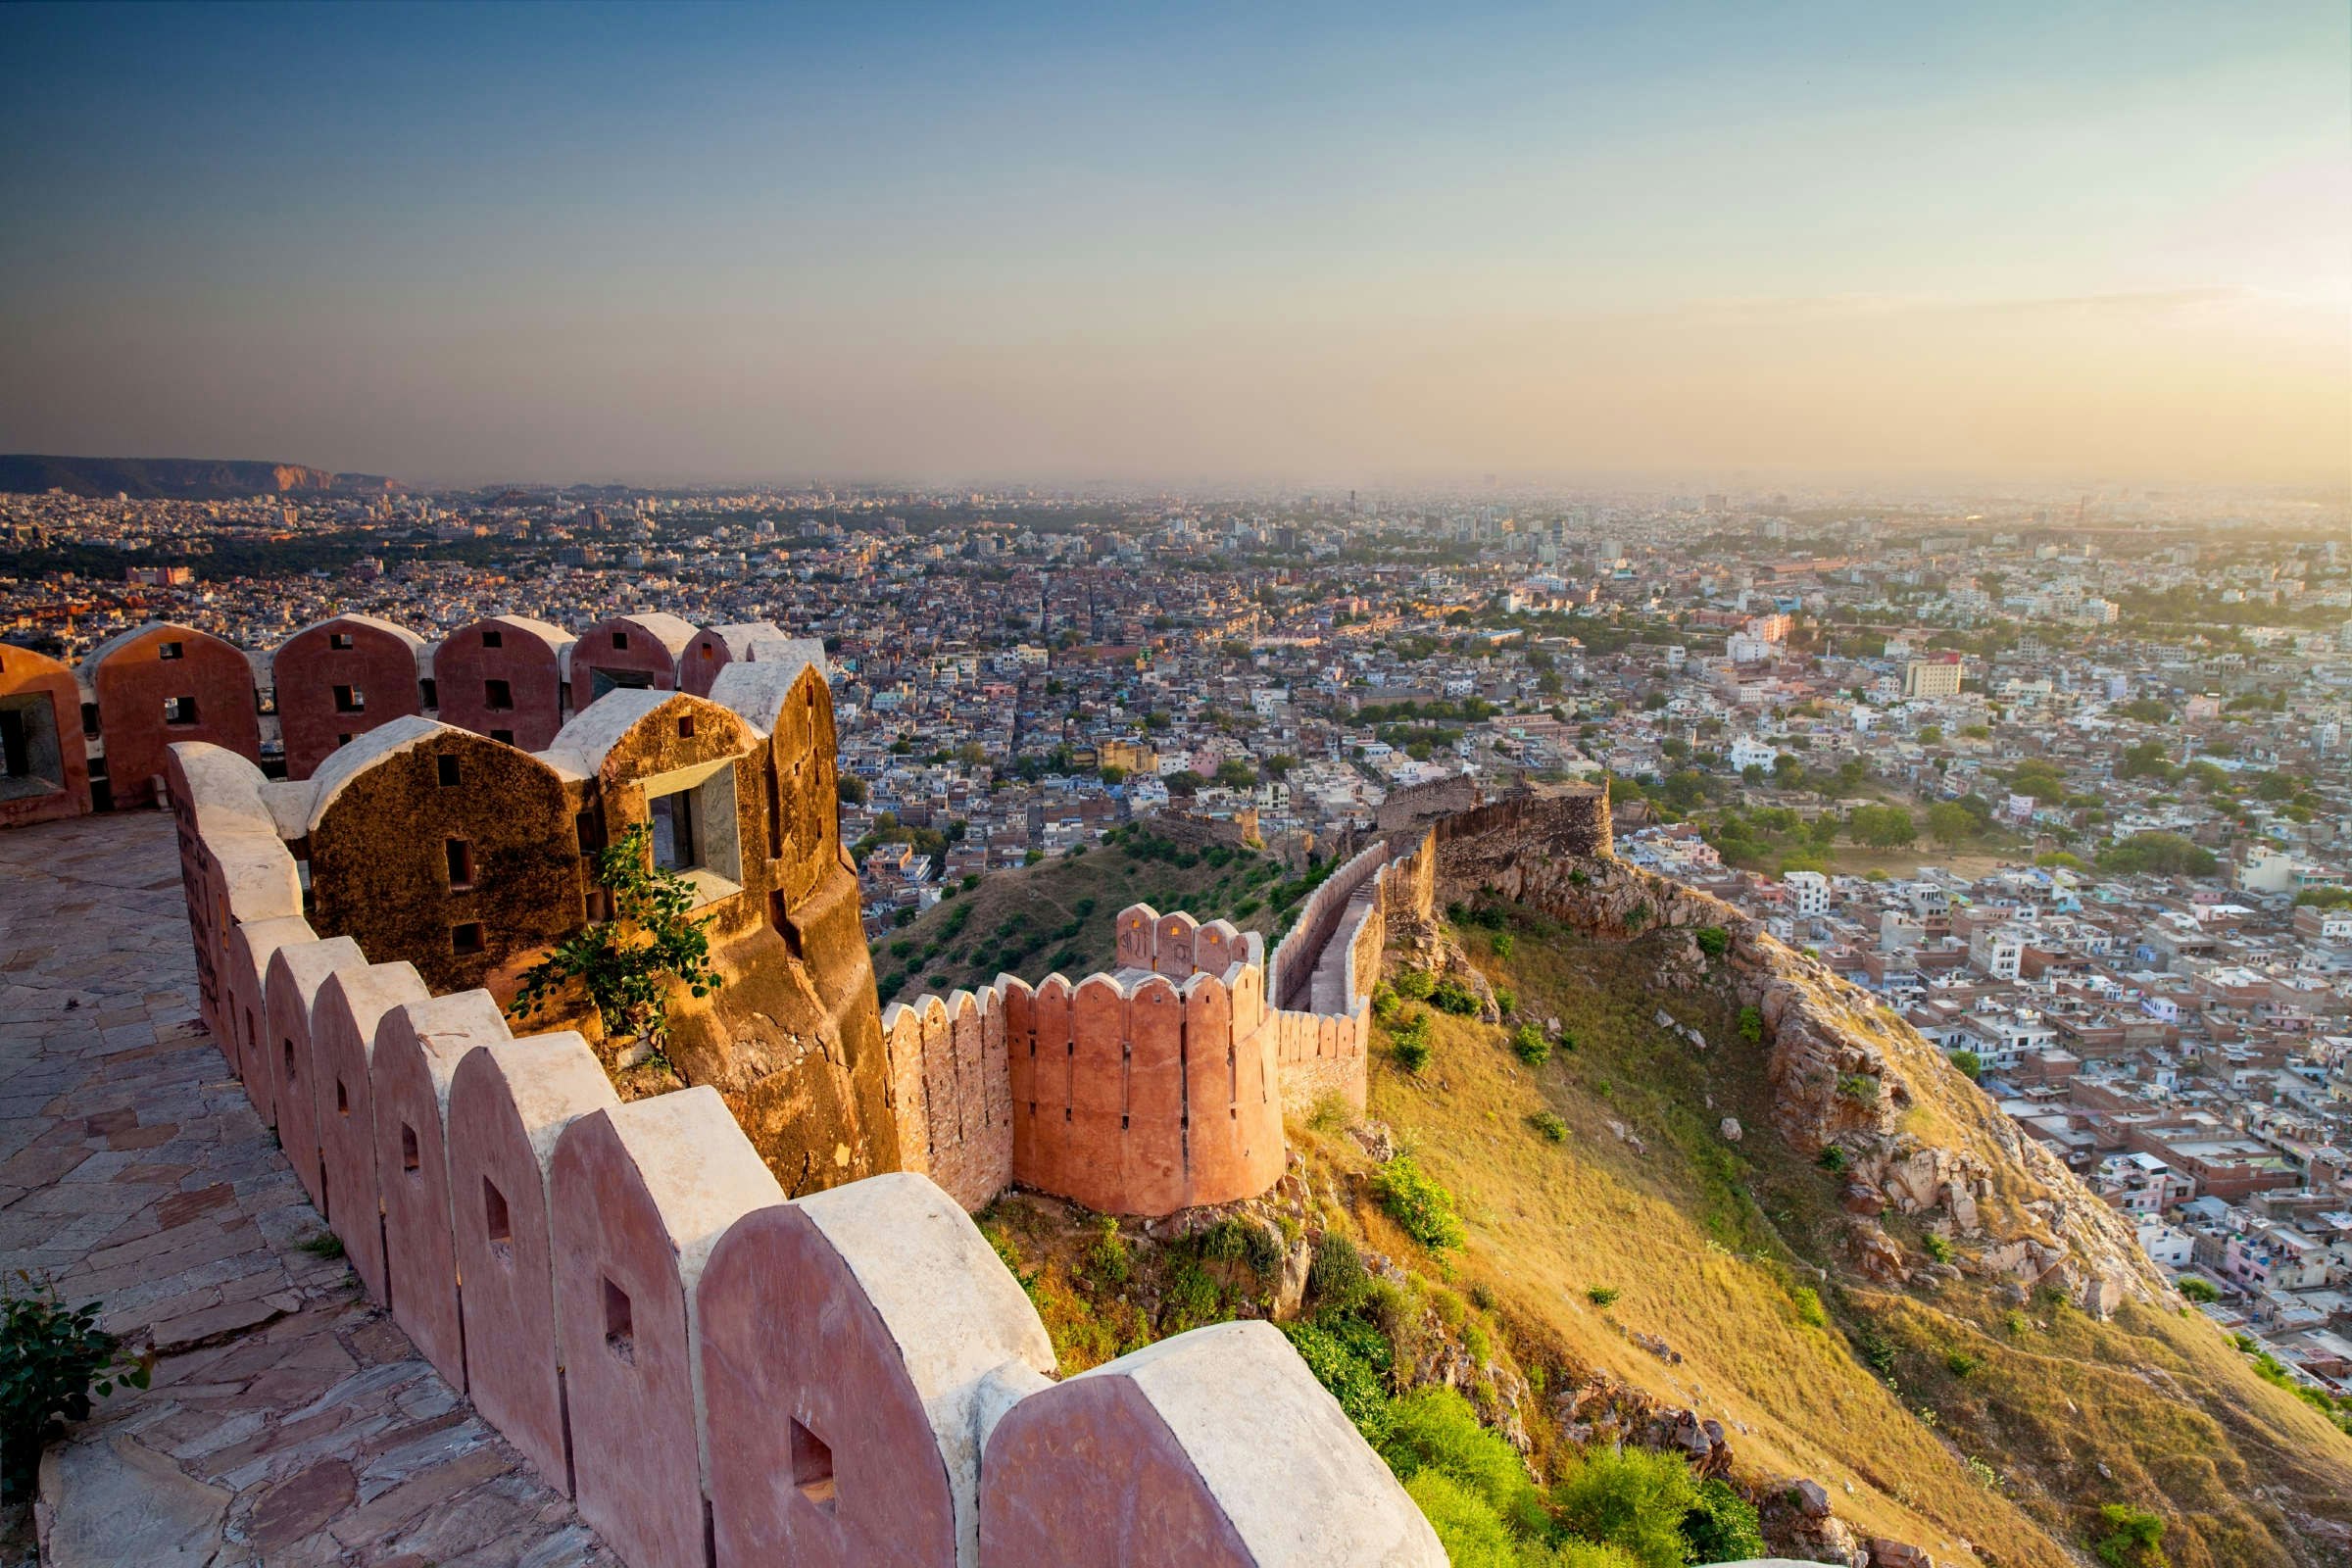 Jaipur from Nahargarh Fort at sunset